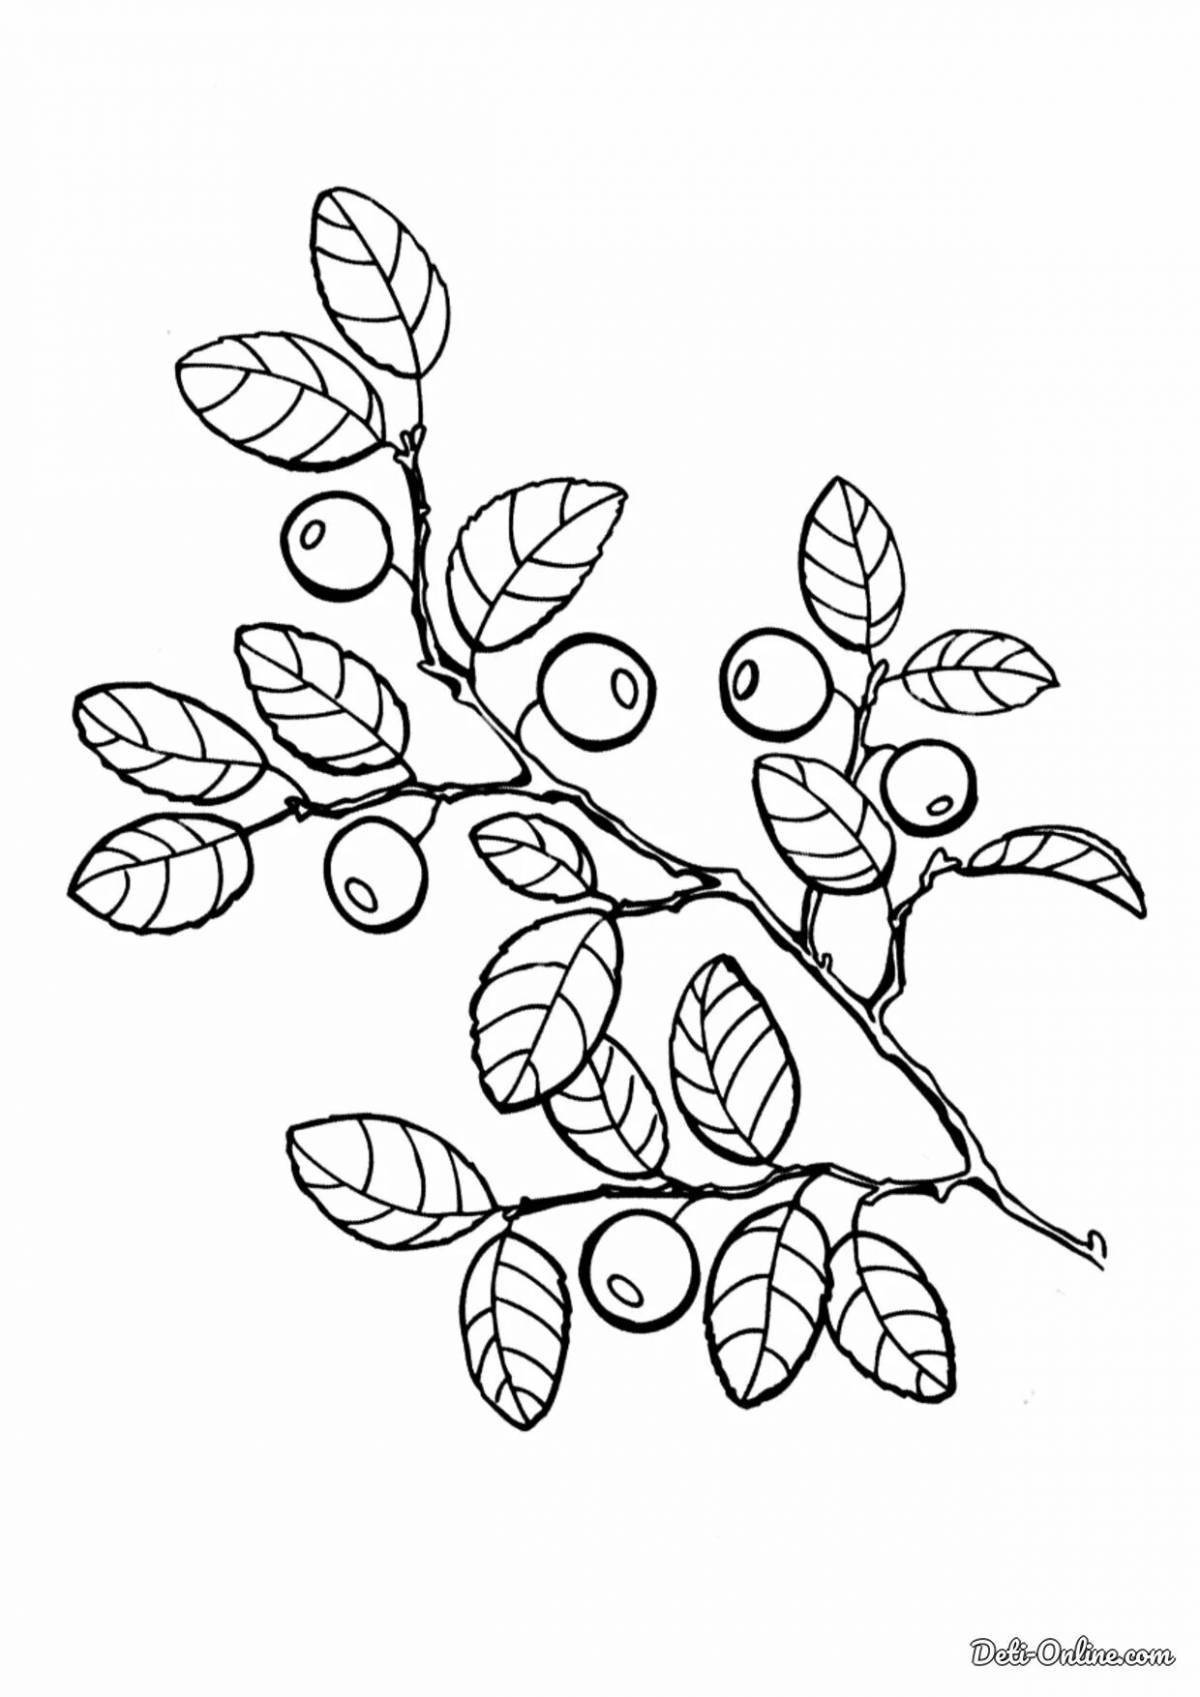 Playful lingonberry coloring page